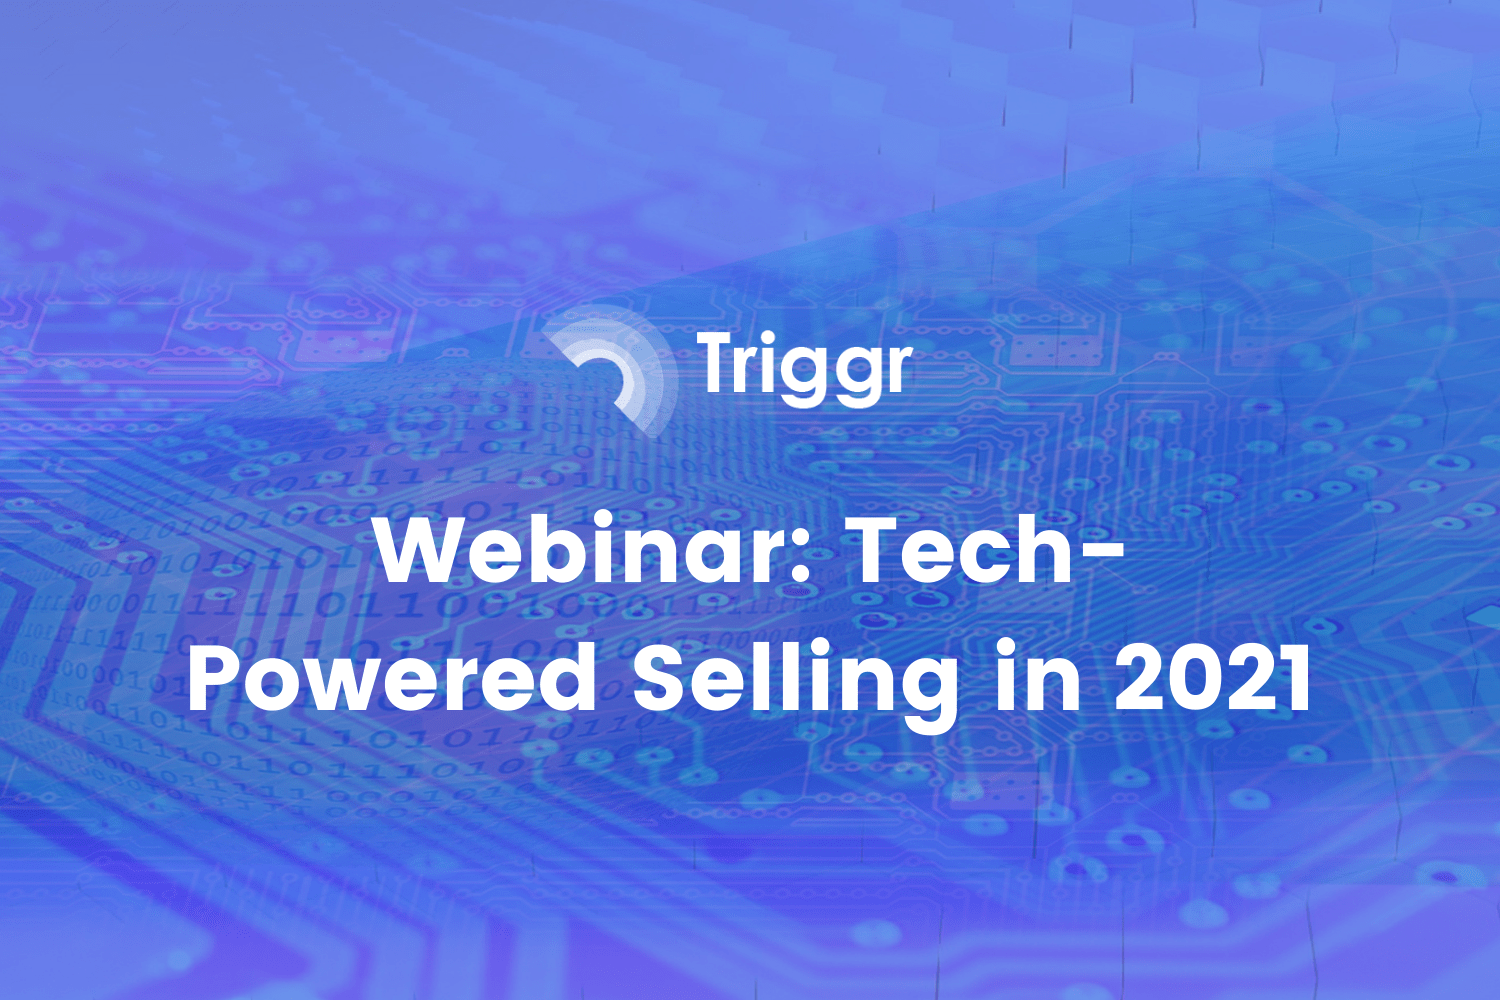 Tech-powered selling 2021